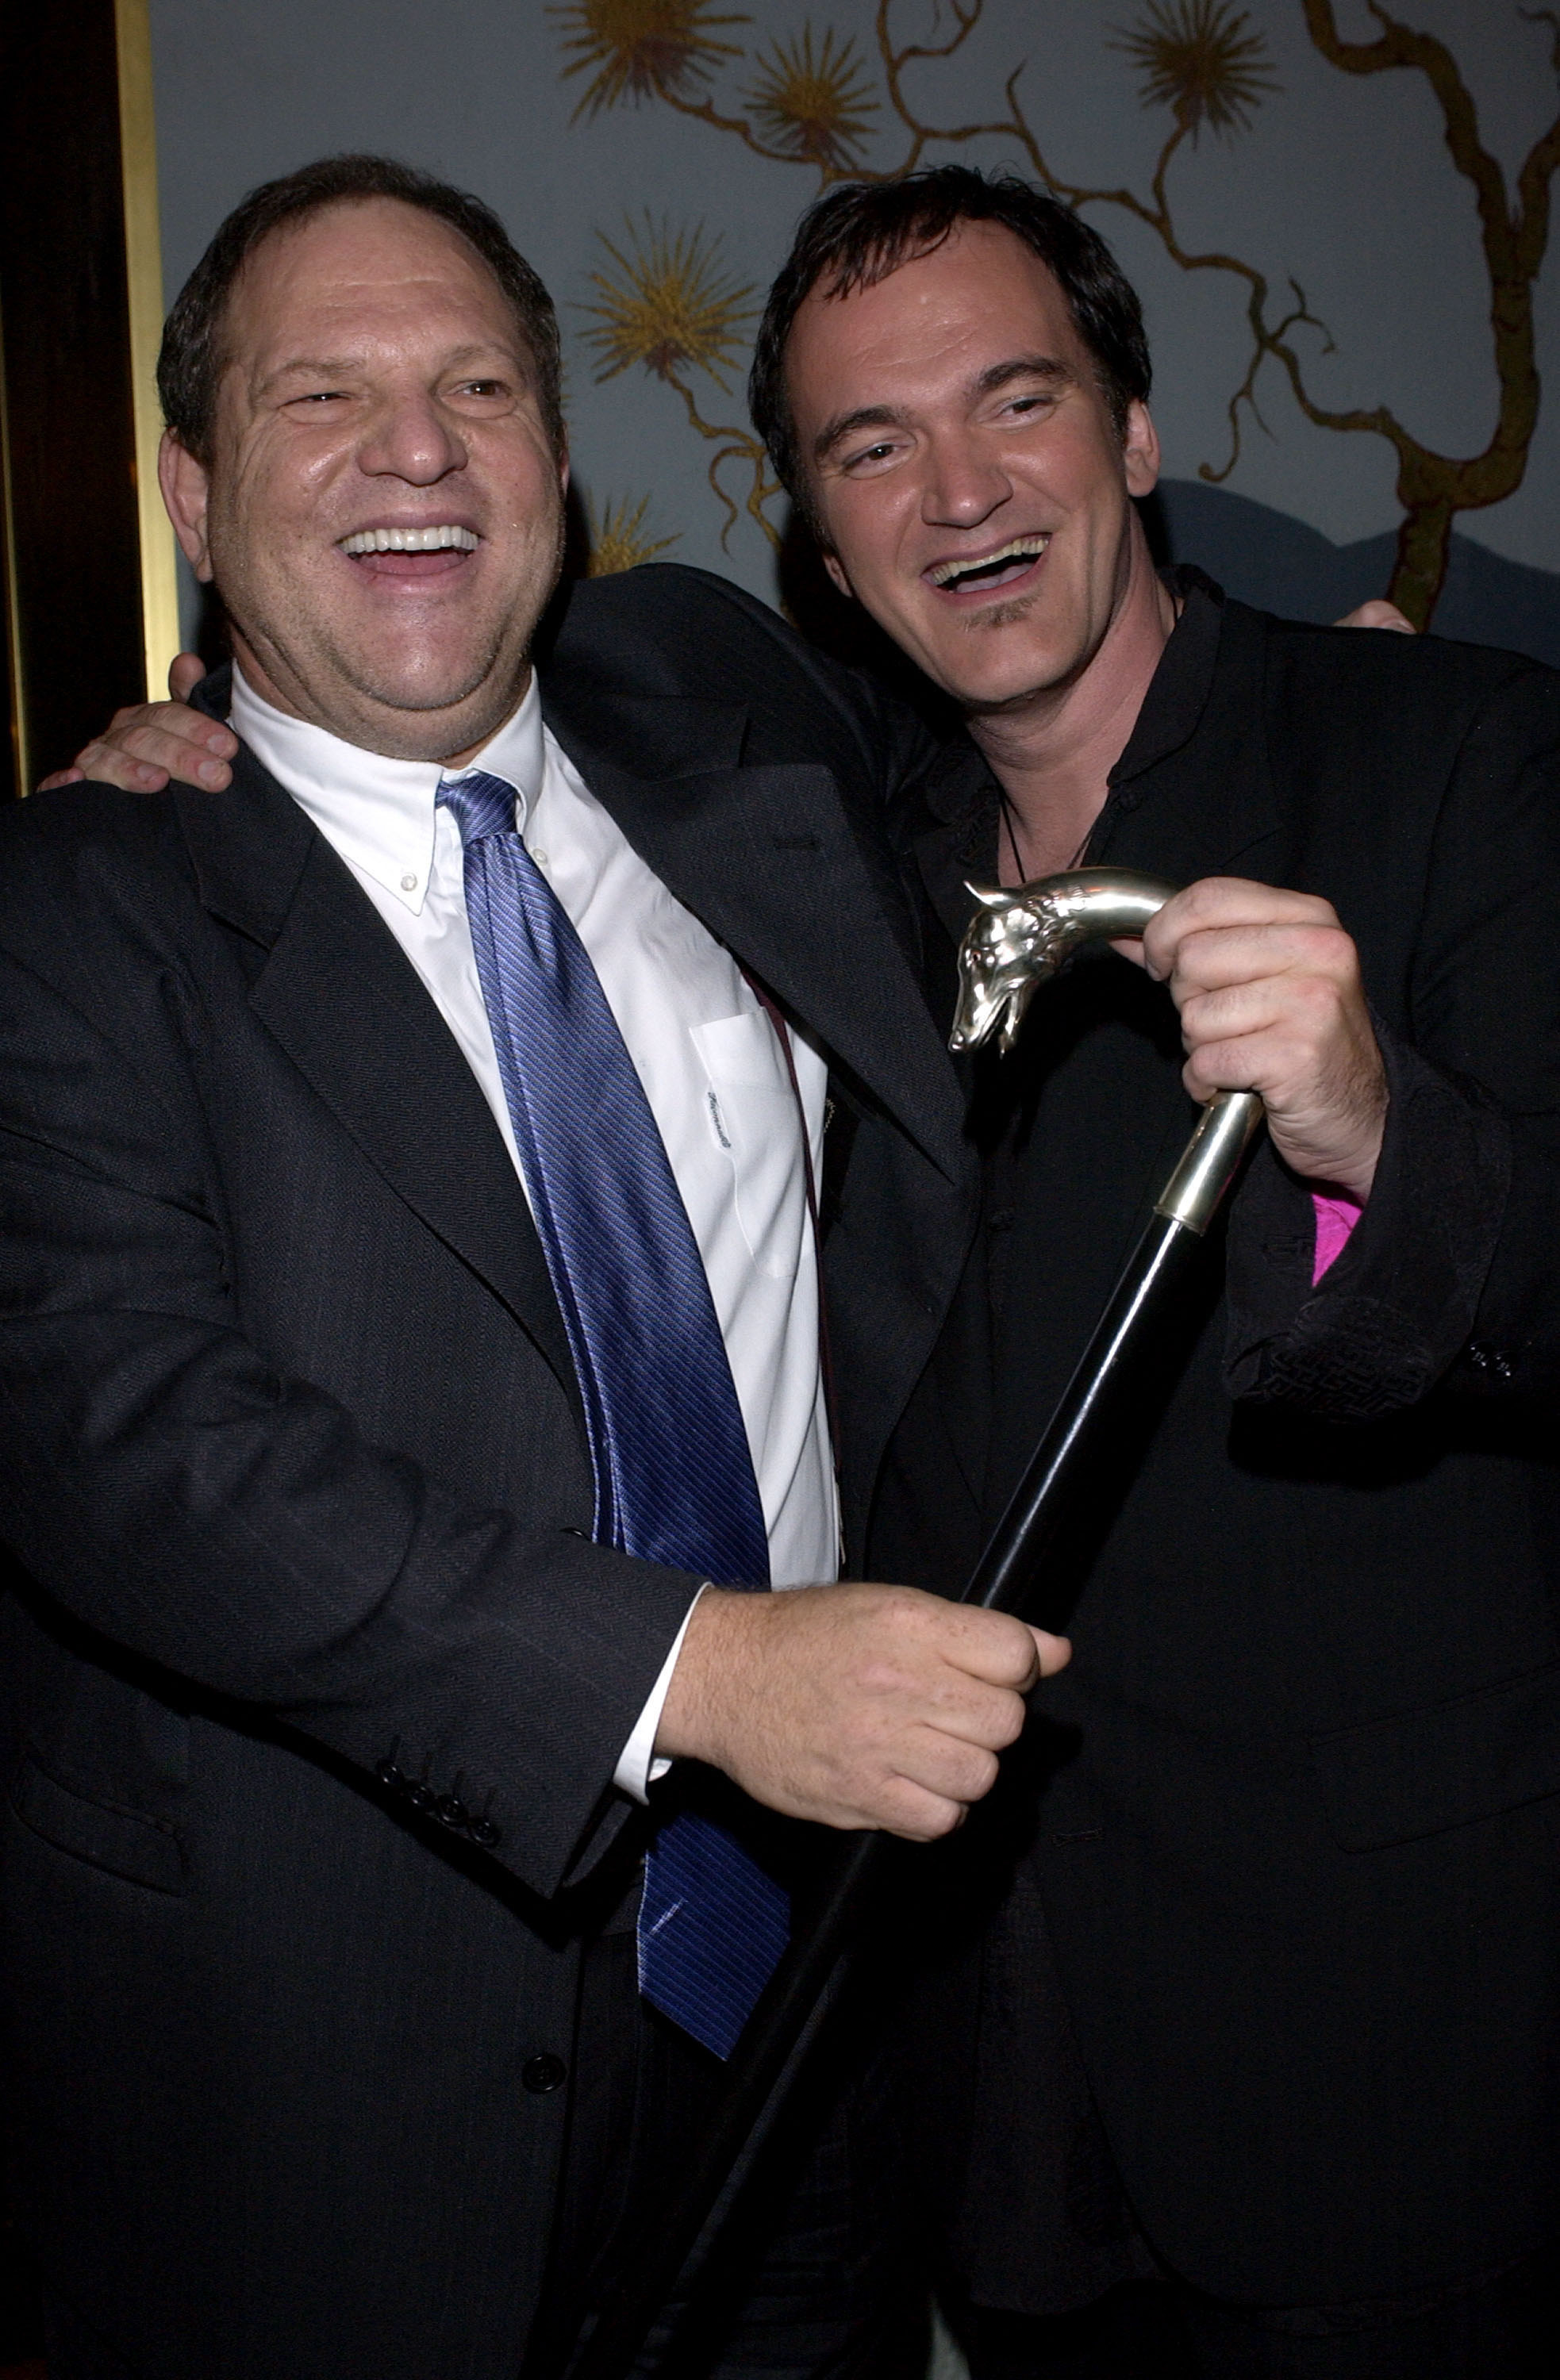 Weinstein and Tarantino enjoy a laugh together at a premiere